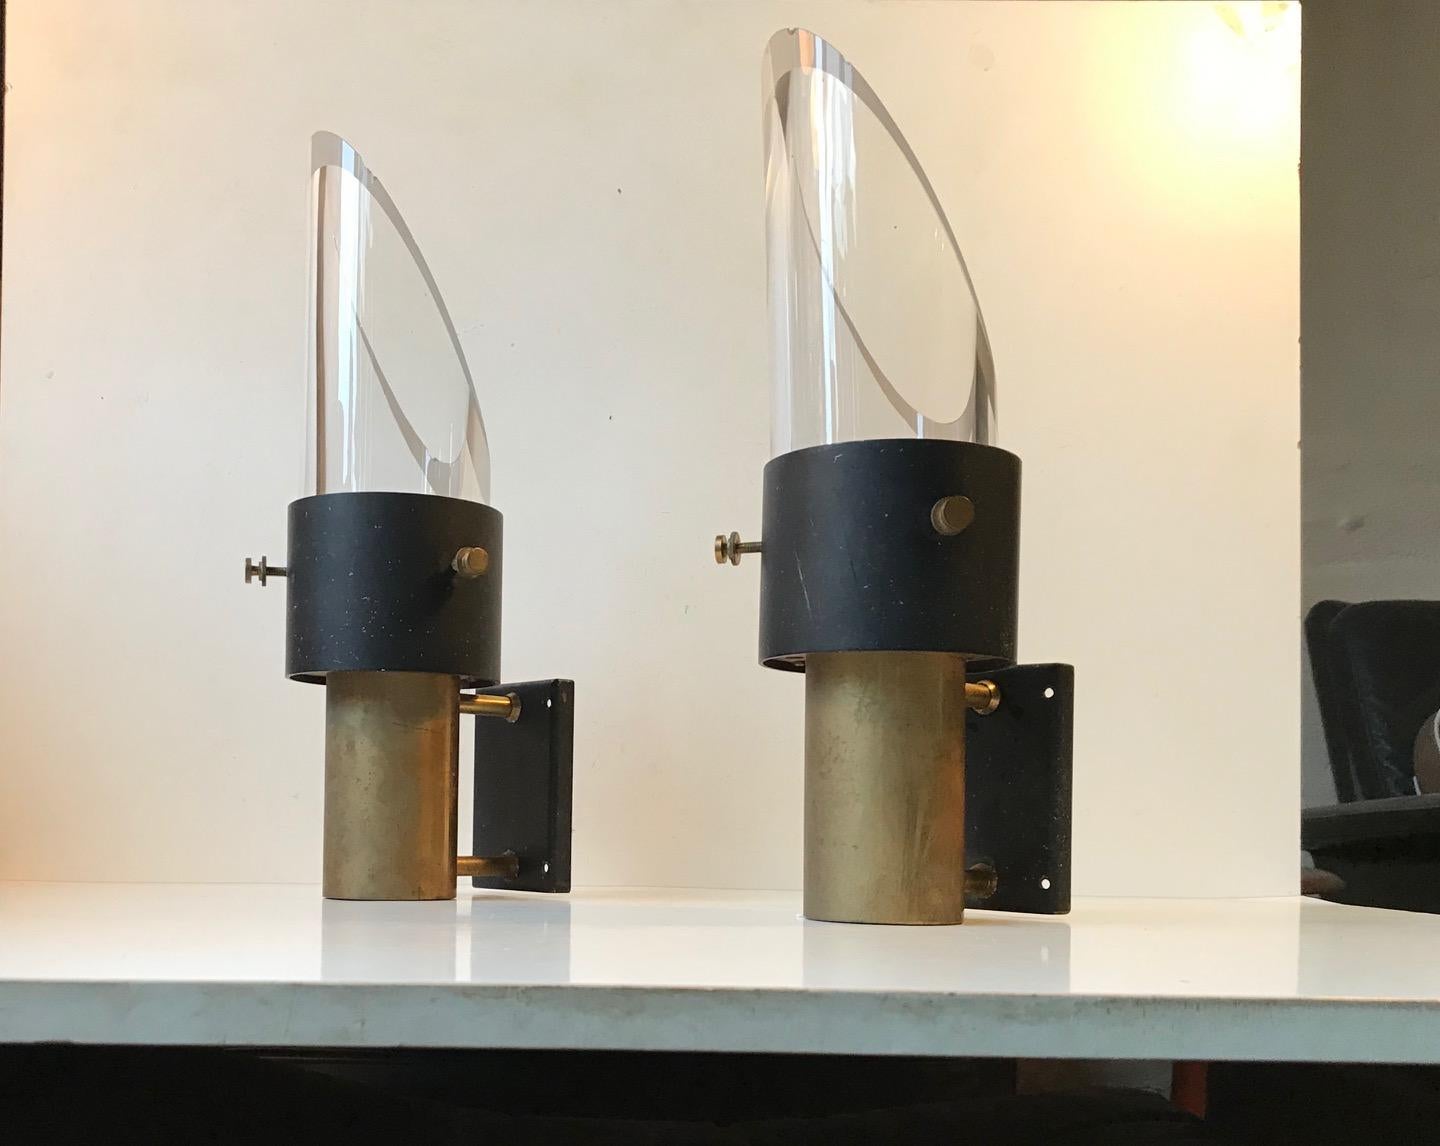 A pair of midcentury wall lamps made by Lyfa in Denmark in collaboration with the Swedish company Orrefors. The design is attributed to Kay Kørbing who designed these for two school ships: M/S Princesse Margrethe and M/S Winston Churchill. The body